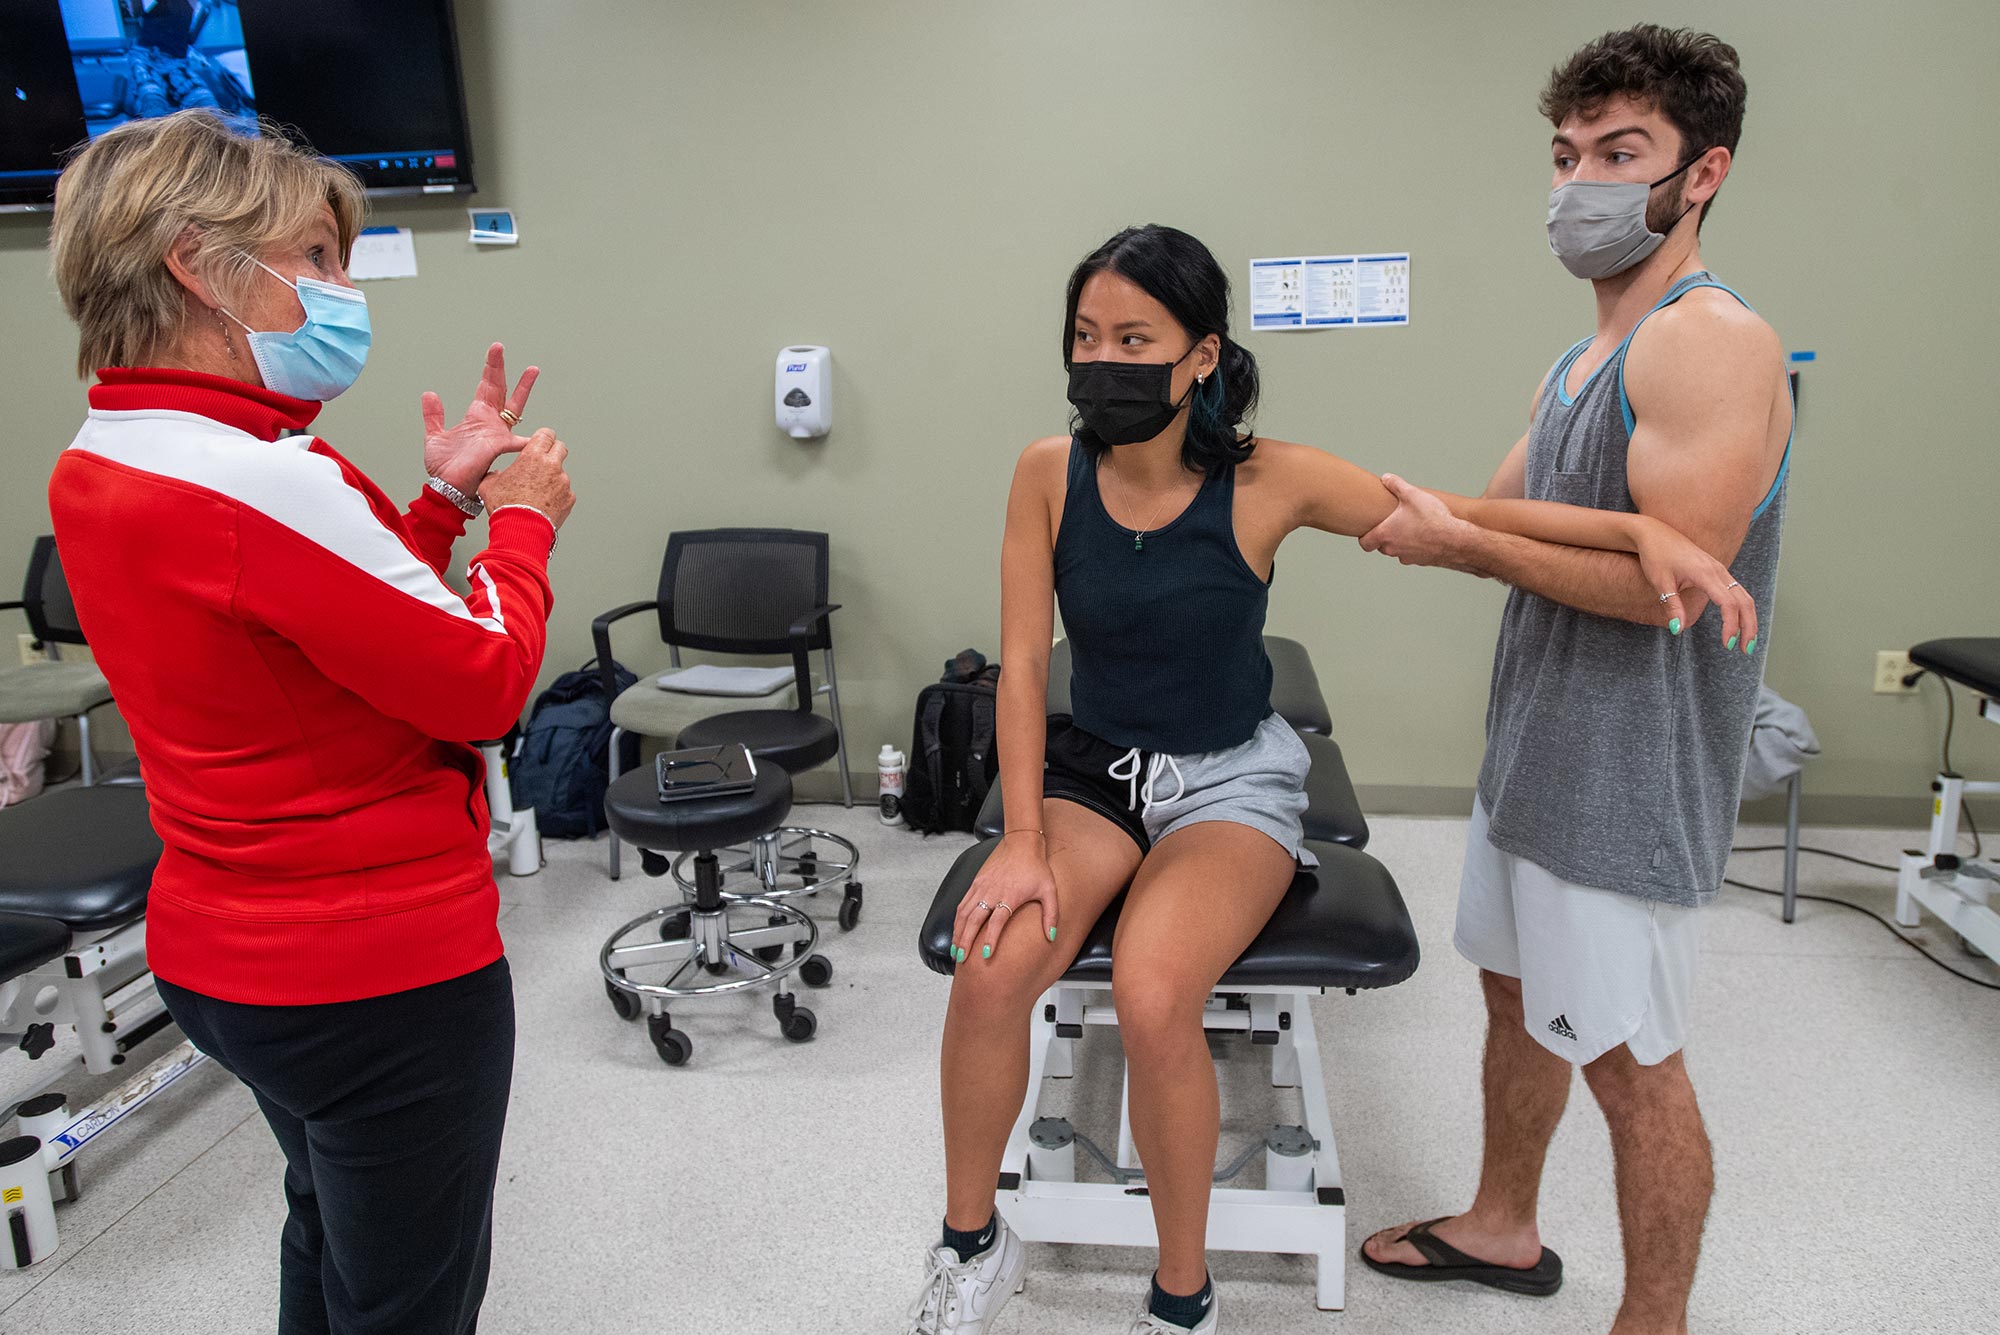 Photo of SAR clinical associate professor Lee Marinko, at left, in a red and white sweater, and Nikita Chou (SAR’24), center, sits on a physical therapy table, and Dominick Farino (SAR’24), who raises Chou’s arm. Each person wears a face mask. Chou and Farino look towards Marinko as she explains something.